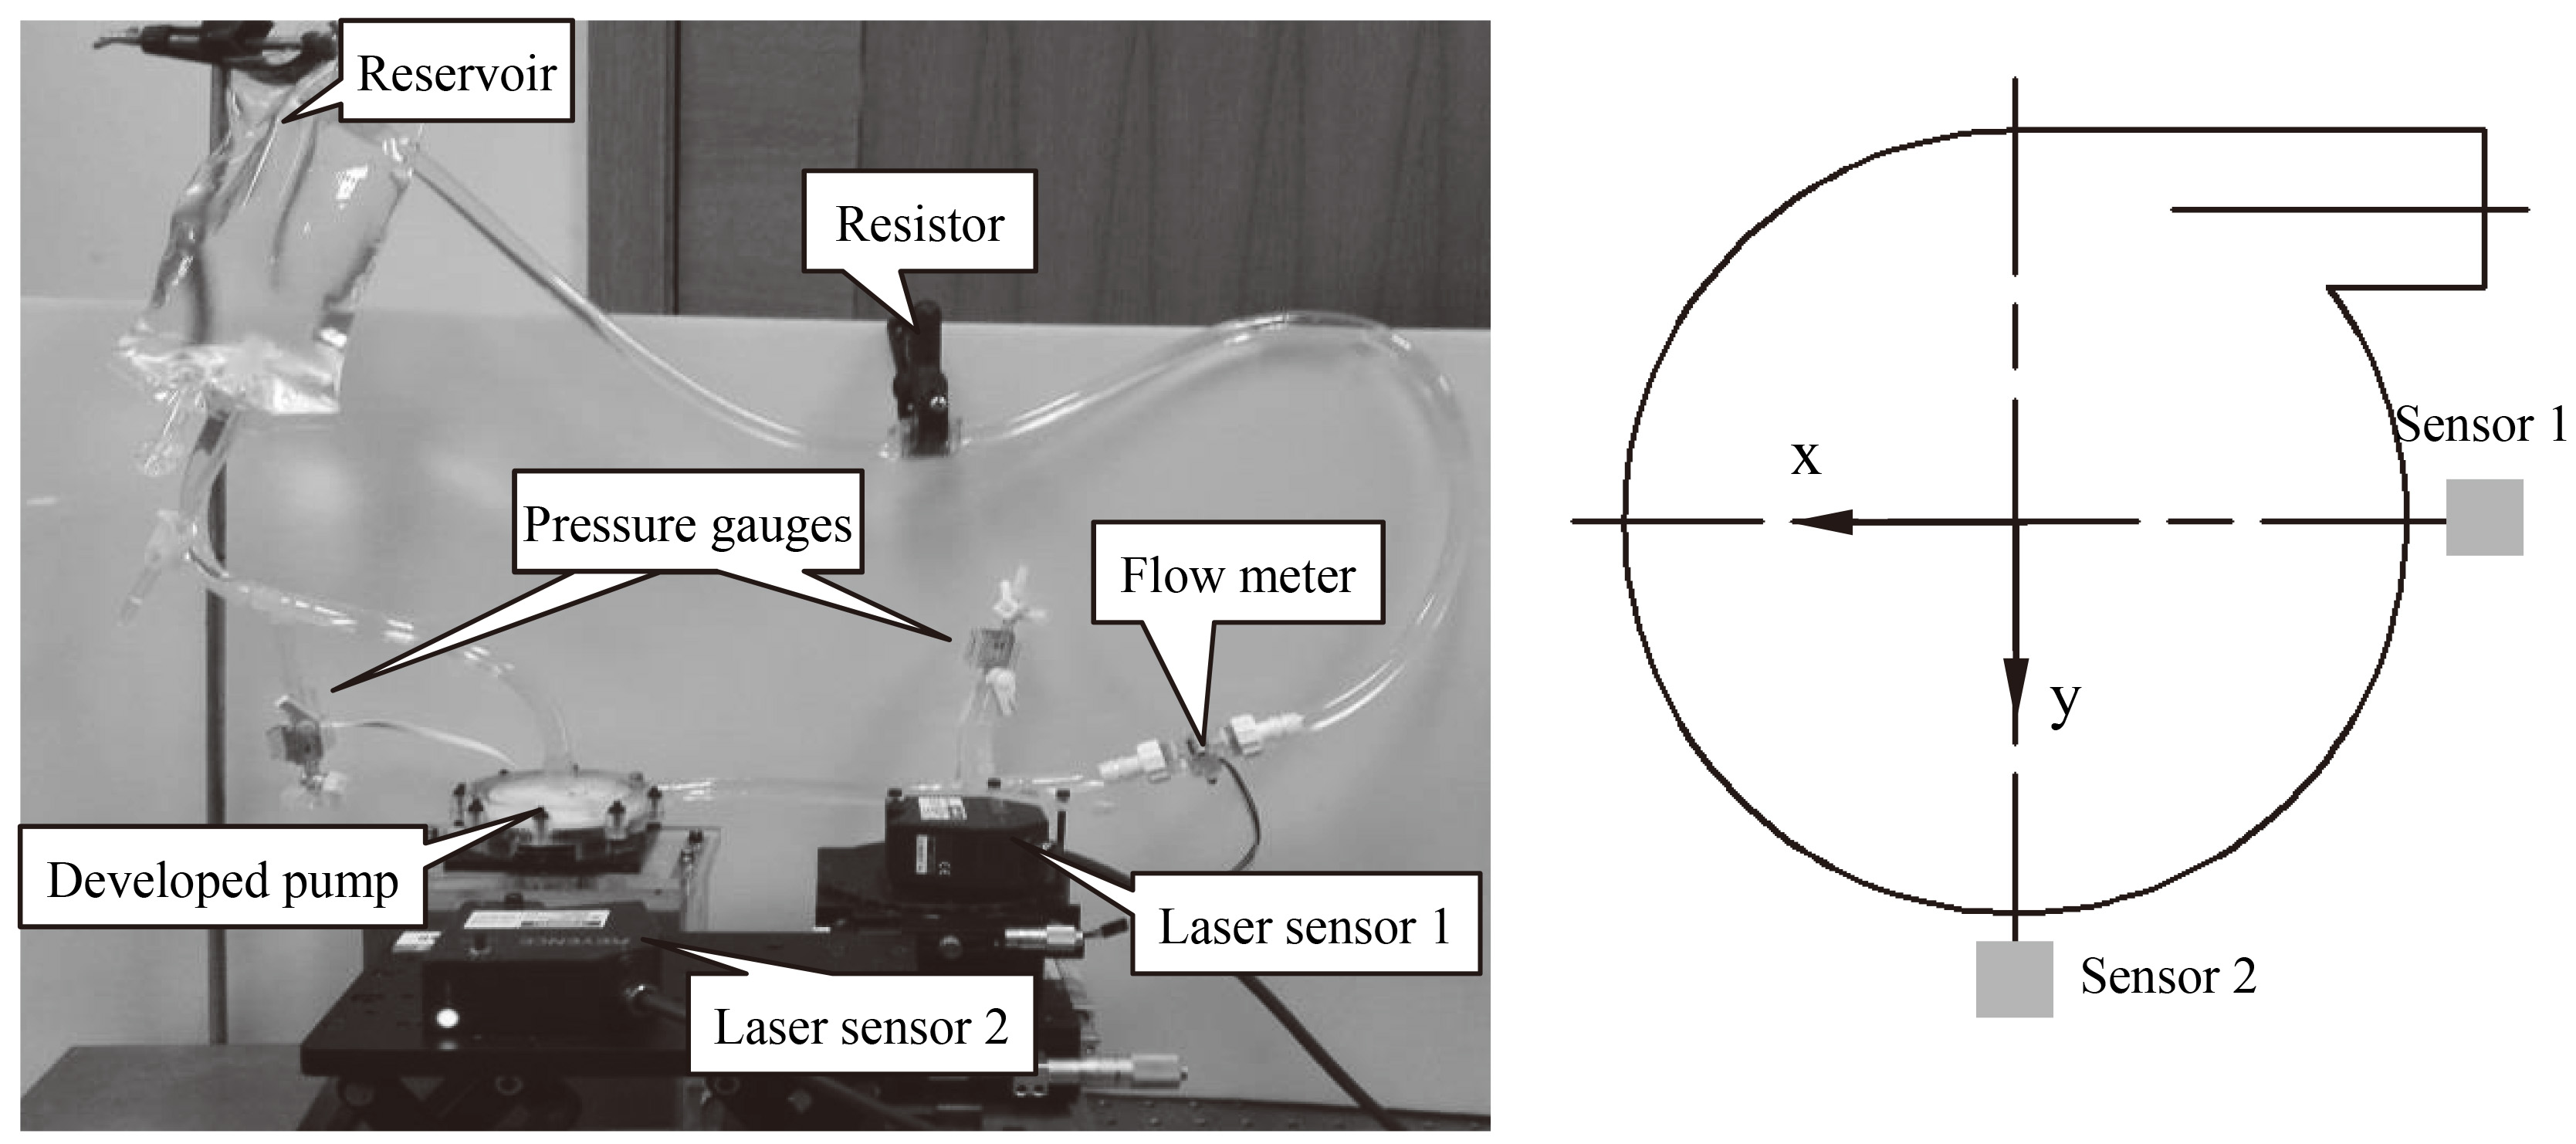 Measurement system for measuring the impeller trajectory using two laser displacement sensors.